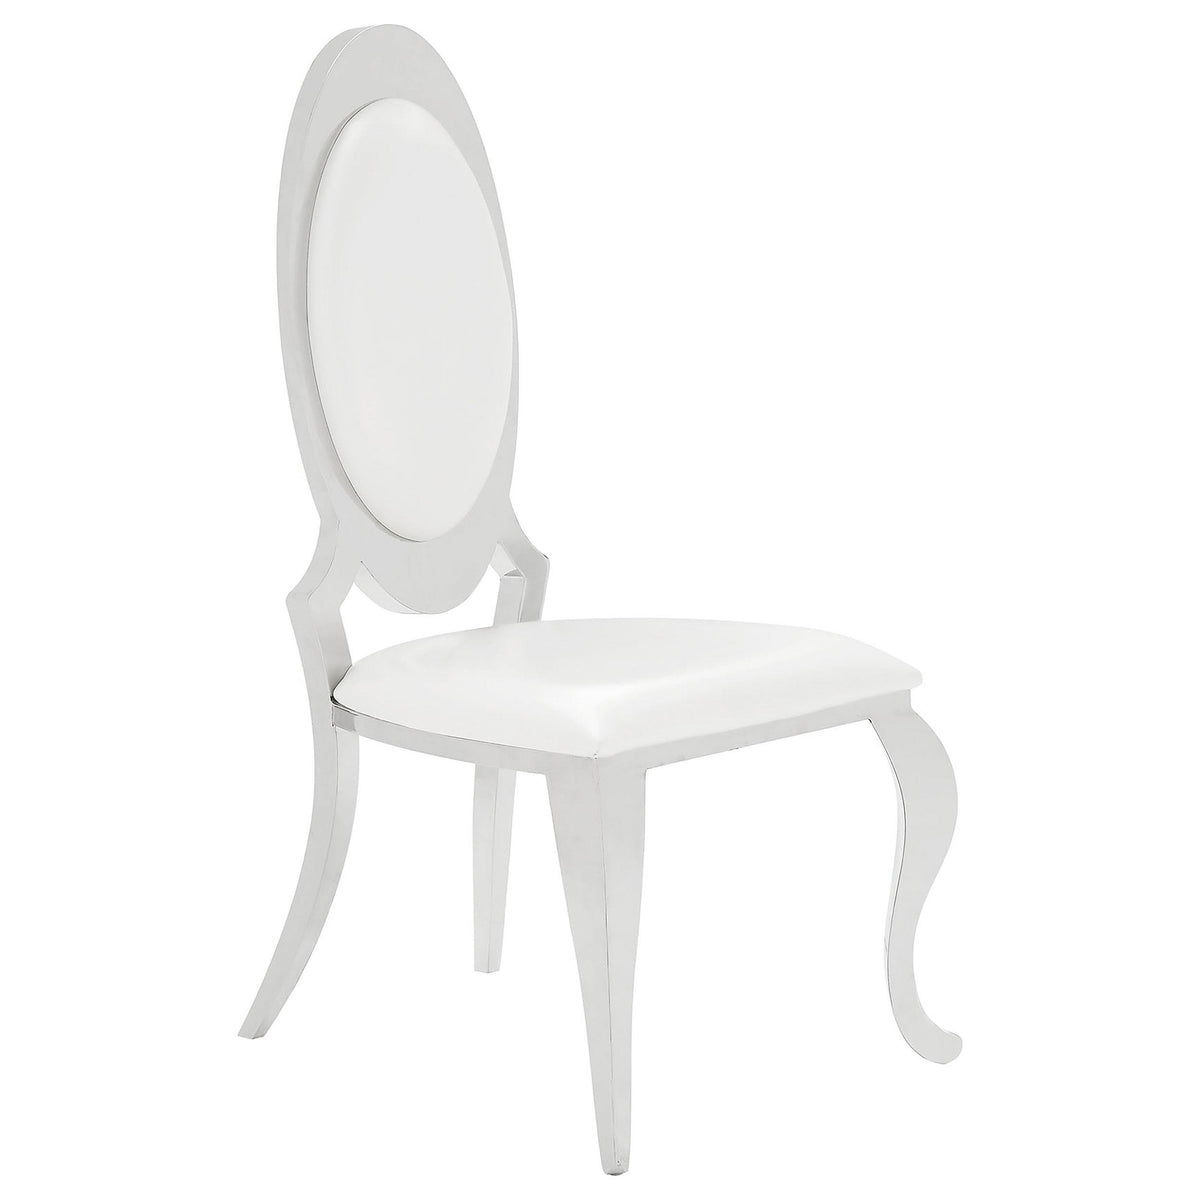 Anchorage Oval Back Side Chairs Cream and Chrome (Set of 2)  Half Price Furniture